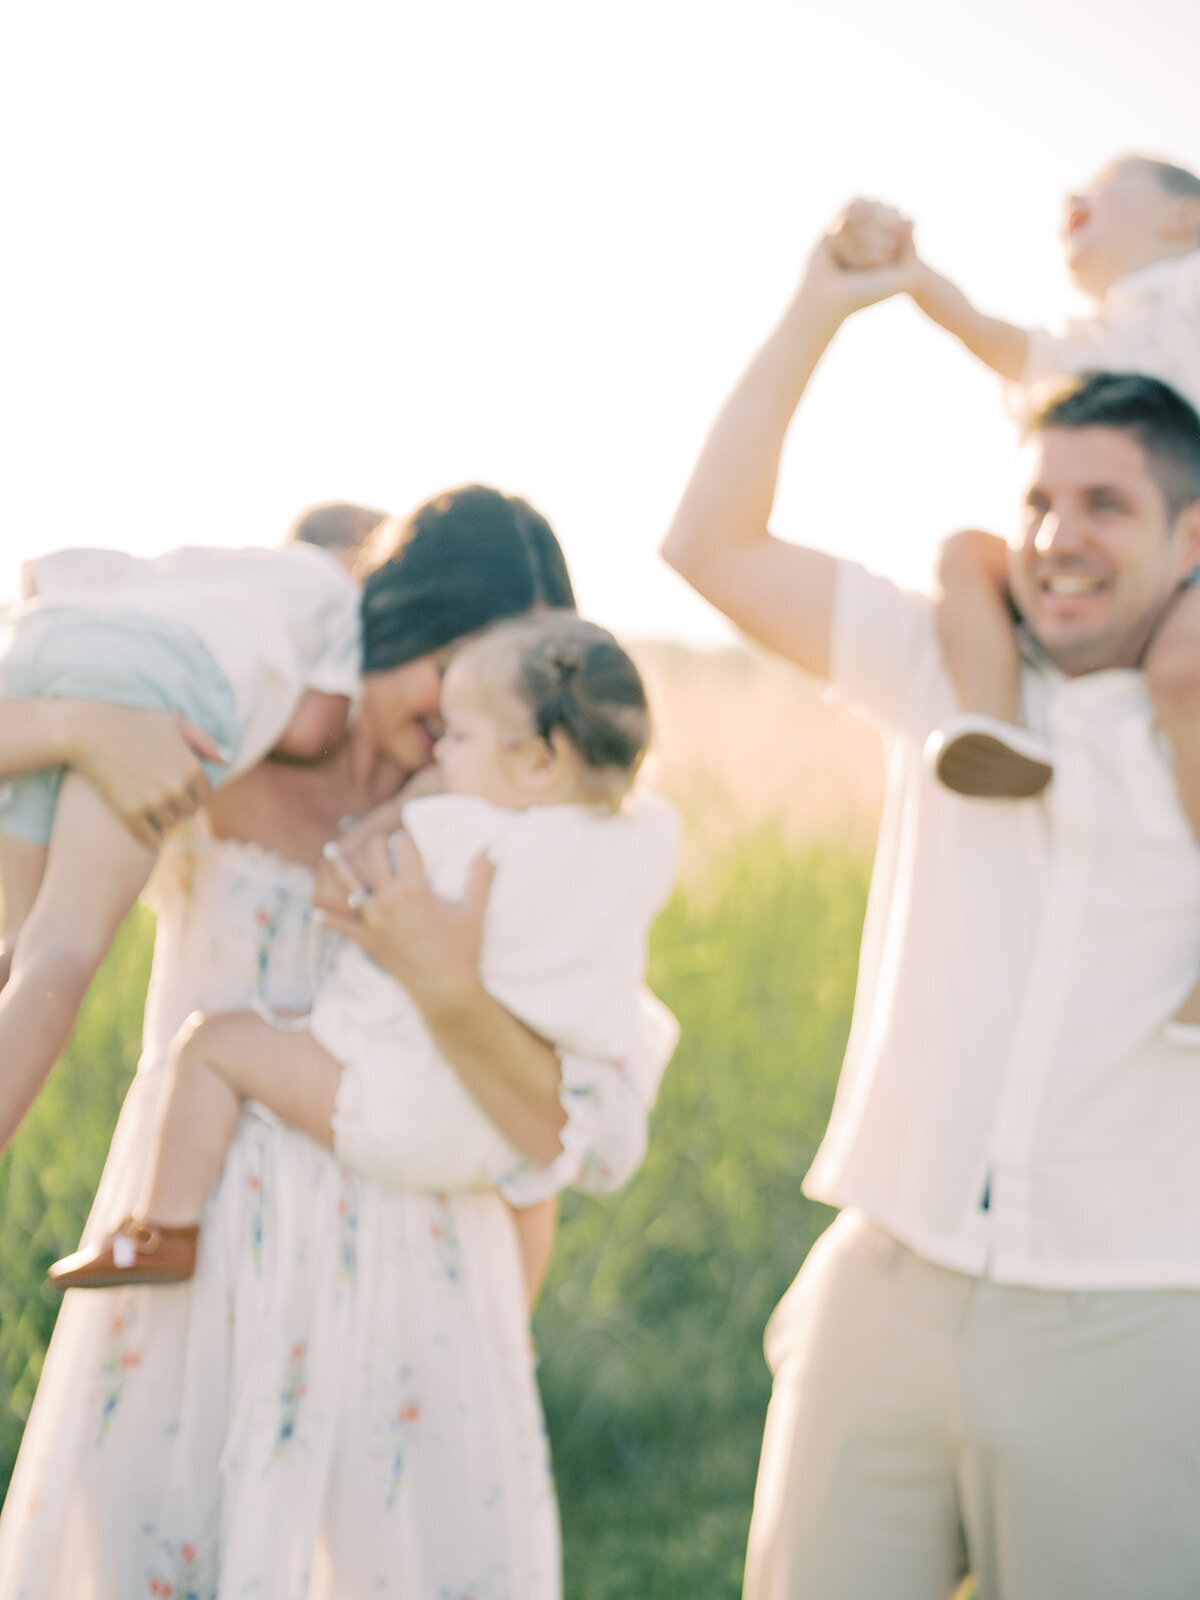 Out-of-focus image of a family of five playing in a grassy field.